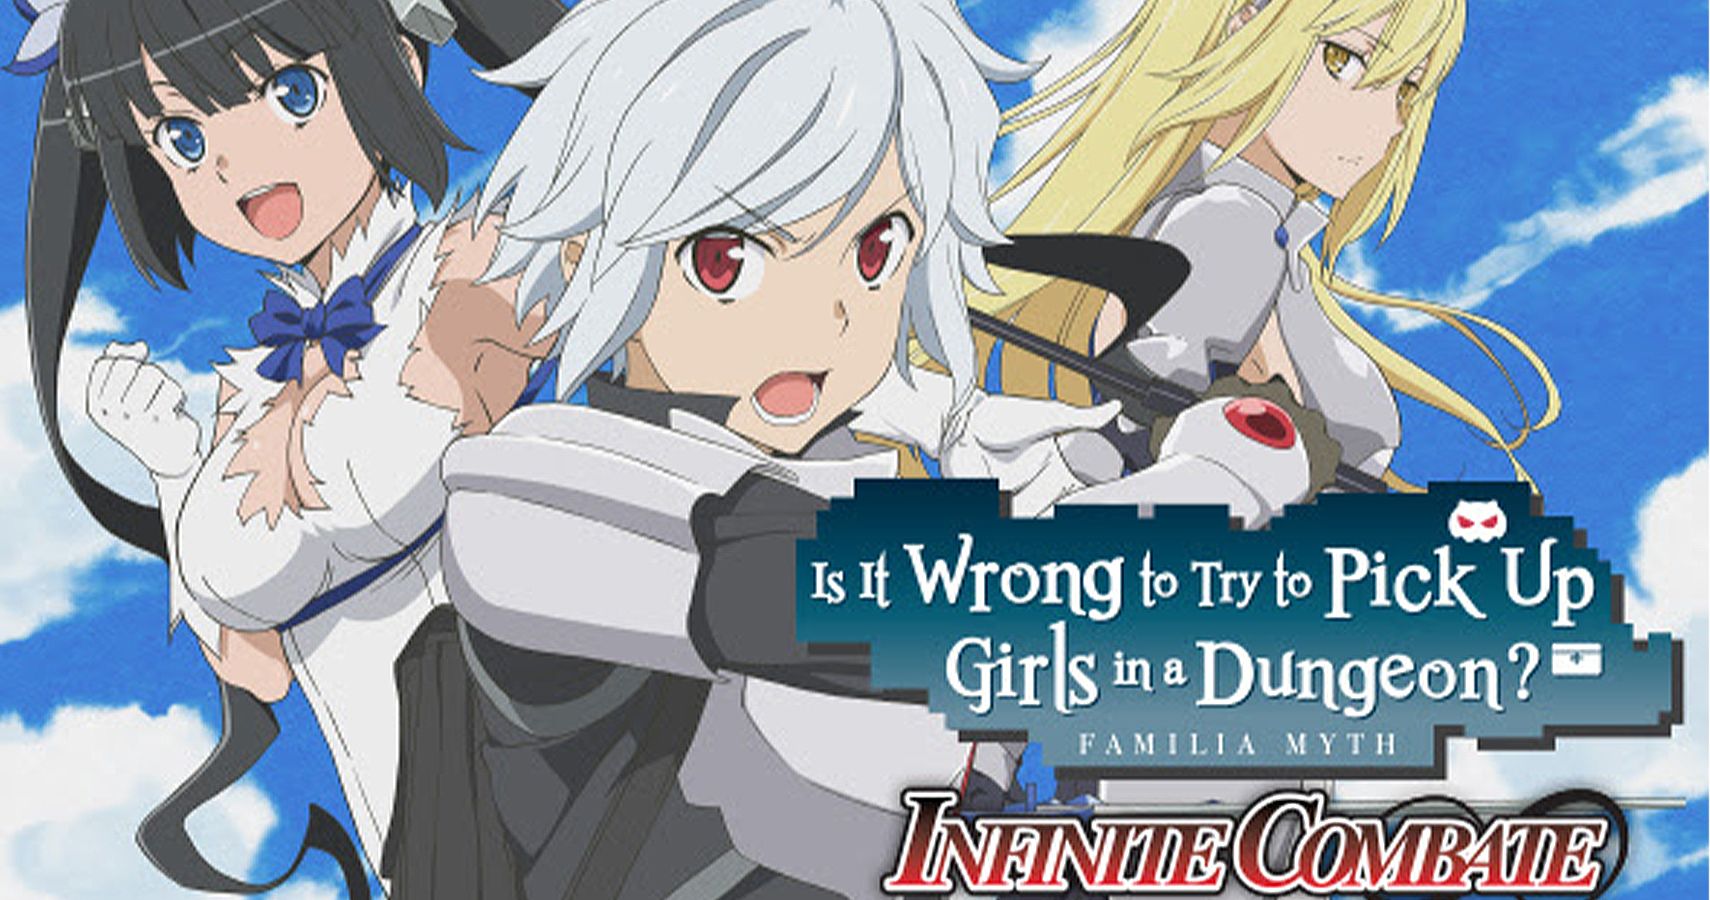 Is It Wrong to Try to Pick Up Girls in a Dungeon? Infinite Combate -  PlayStation 4, PlayStation 4